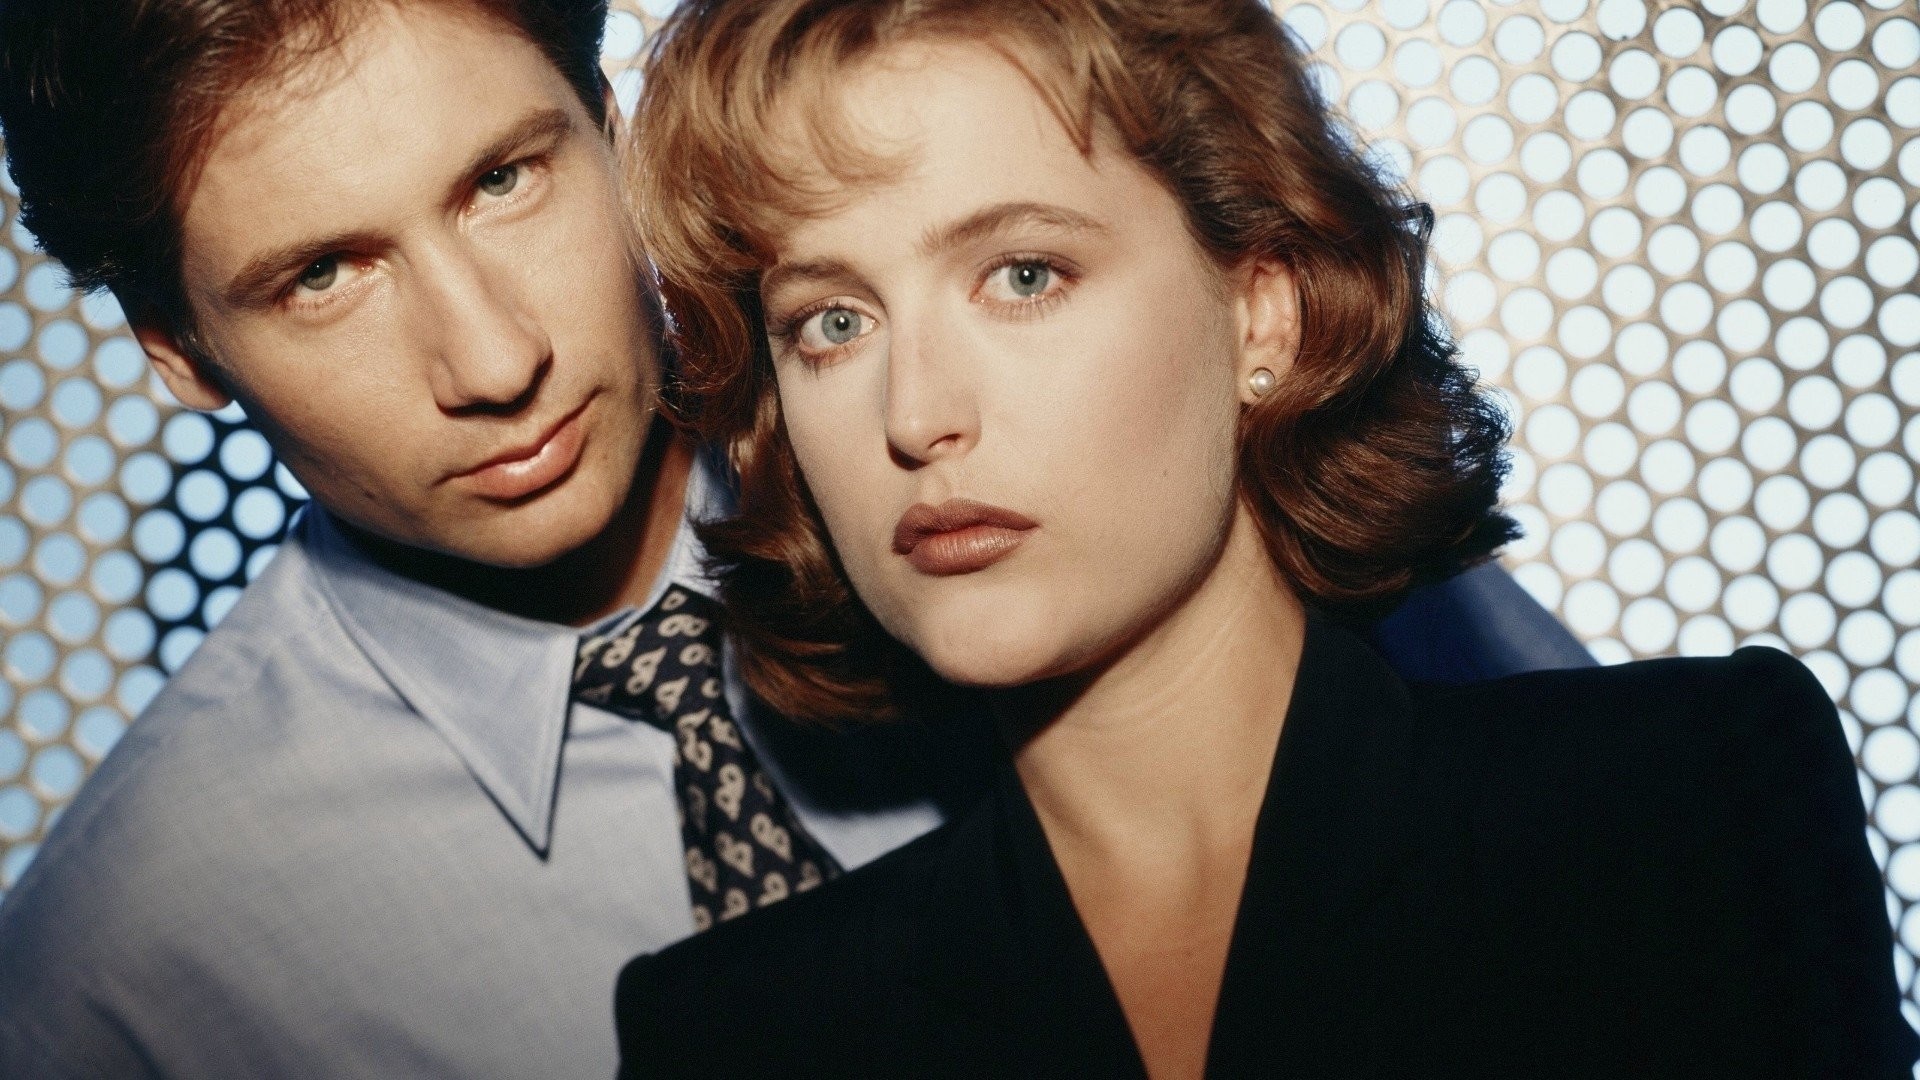 1920x1080 HD Wallpaper | Background Image ID:675805.  TV Show The X-Files